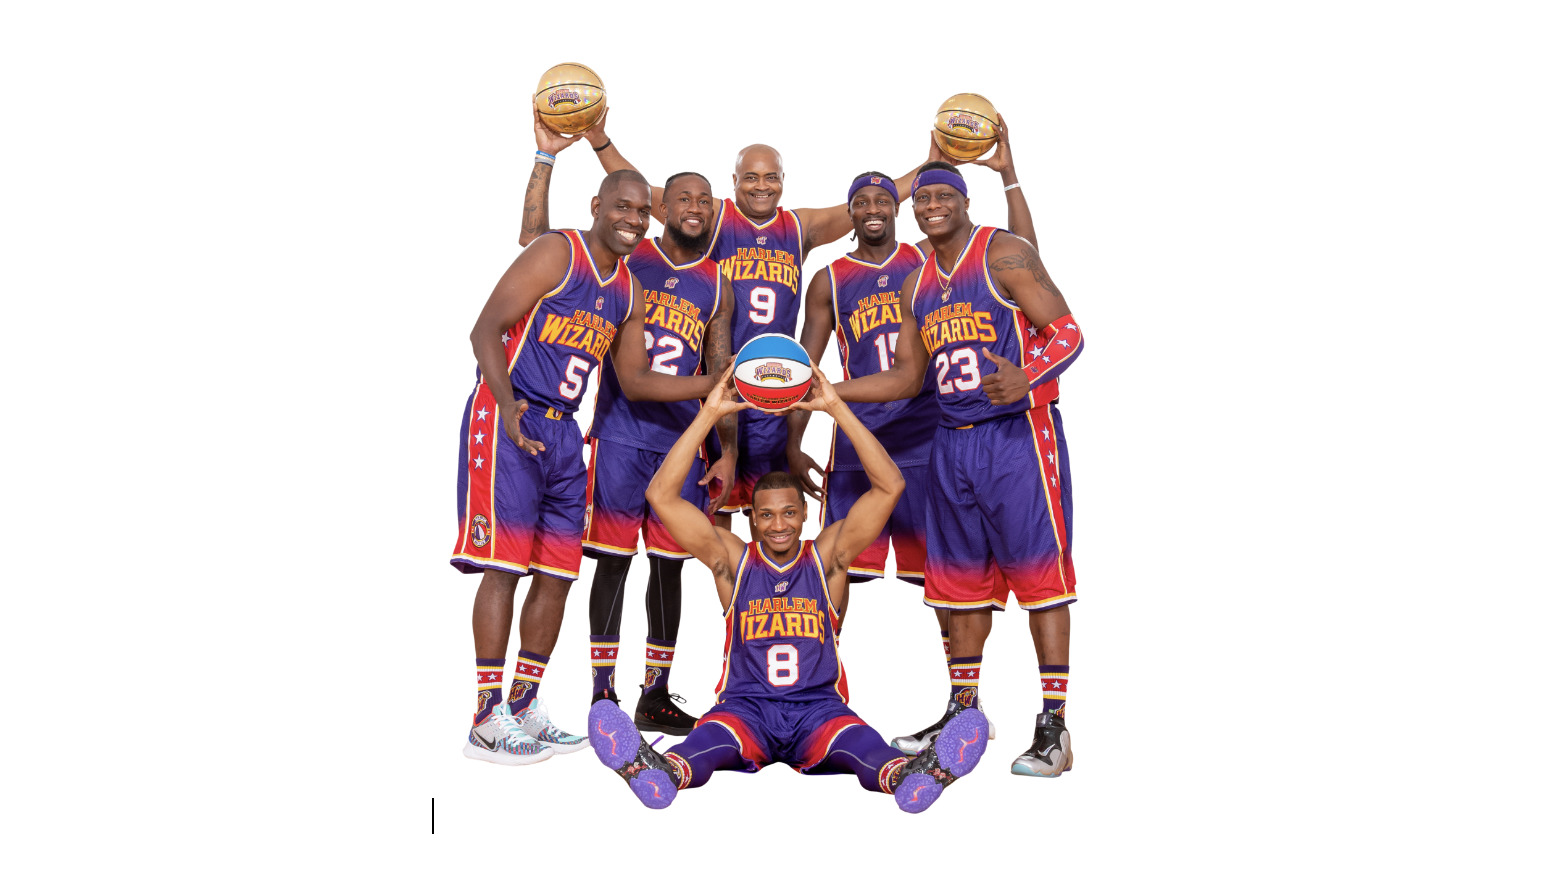 Harlem Wizards to take on Kinship Crew in fundraising basketball